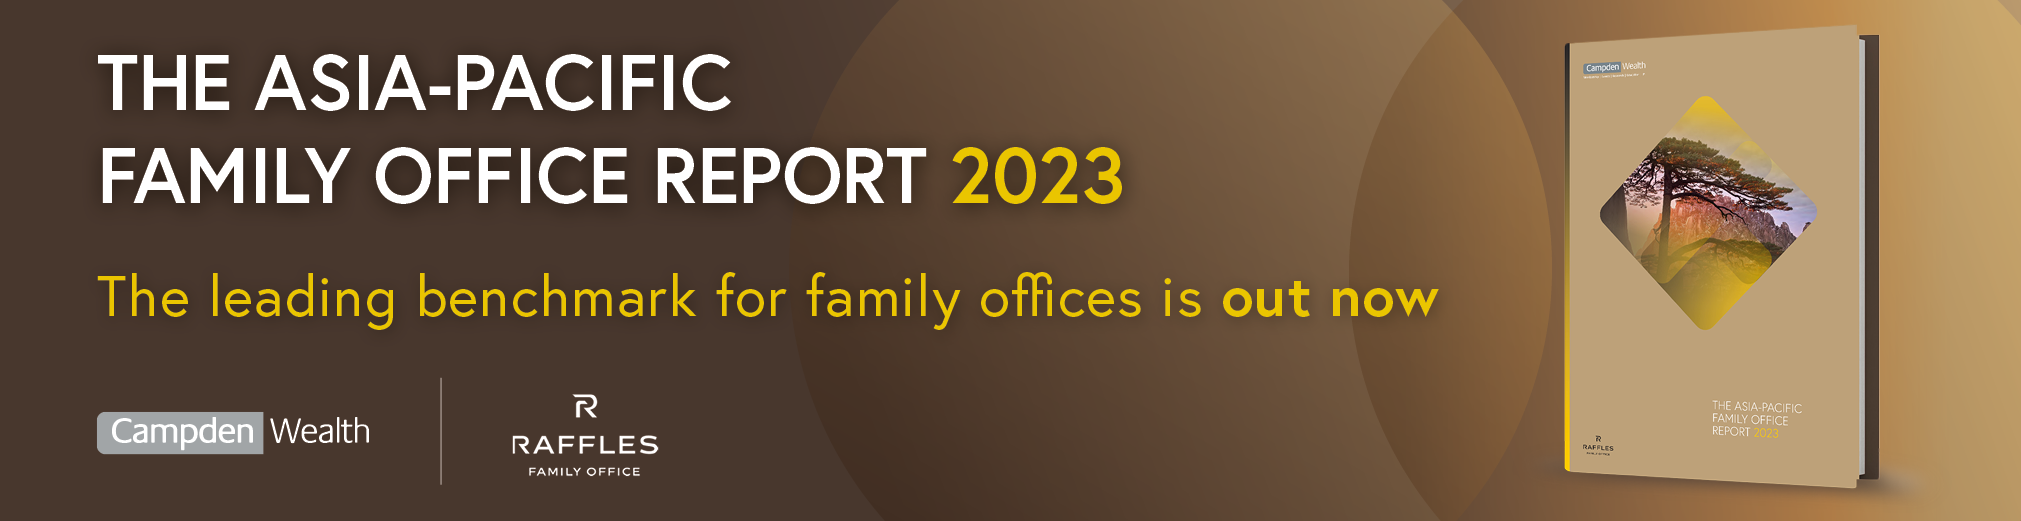 Asia-Pacific Family Office Report 2023